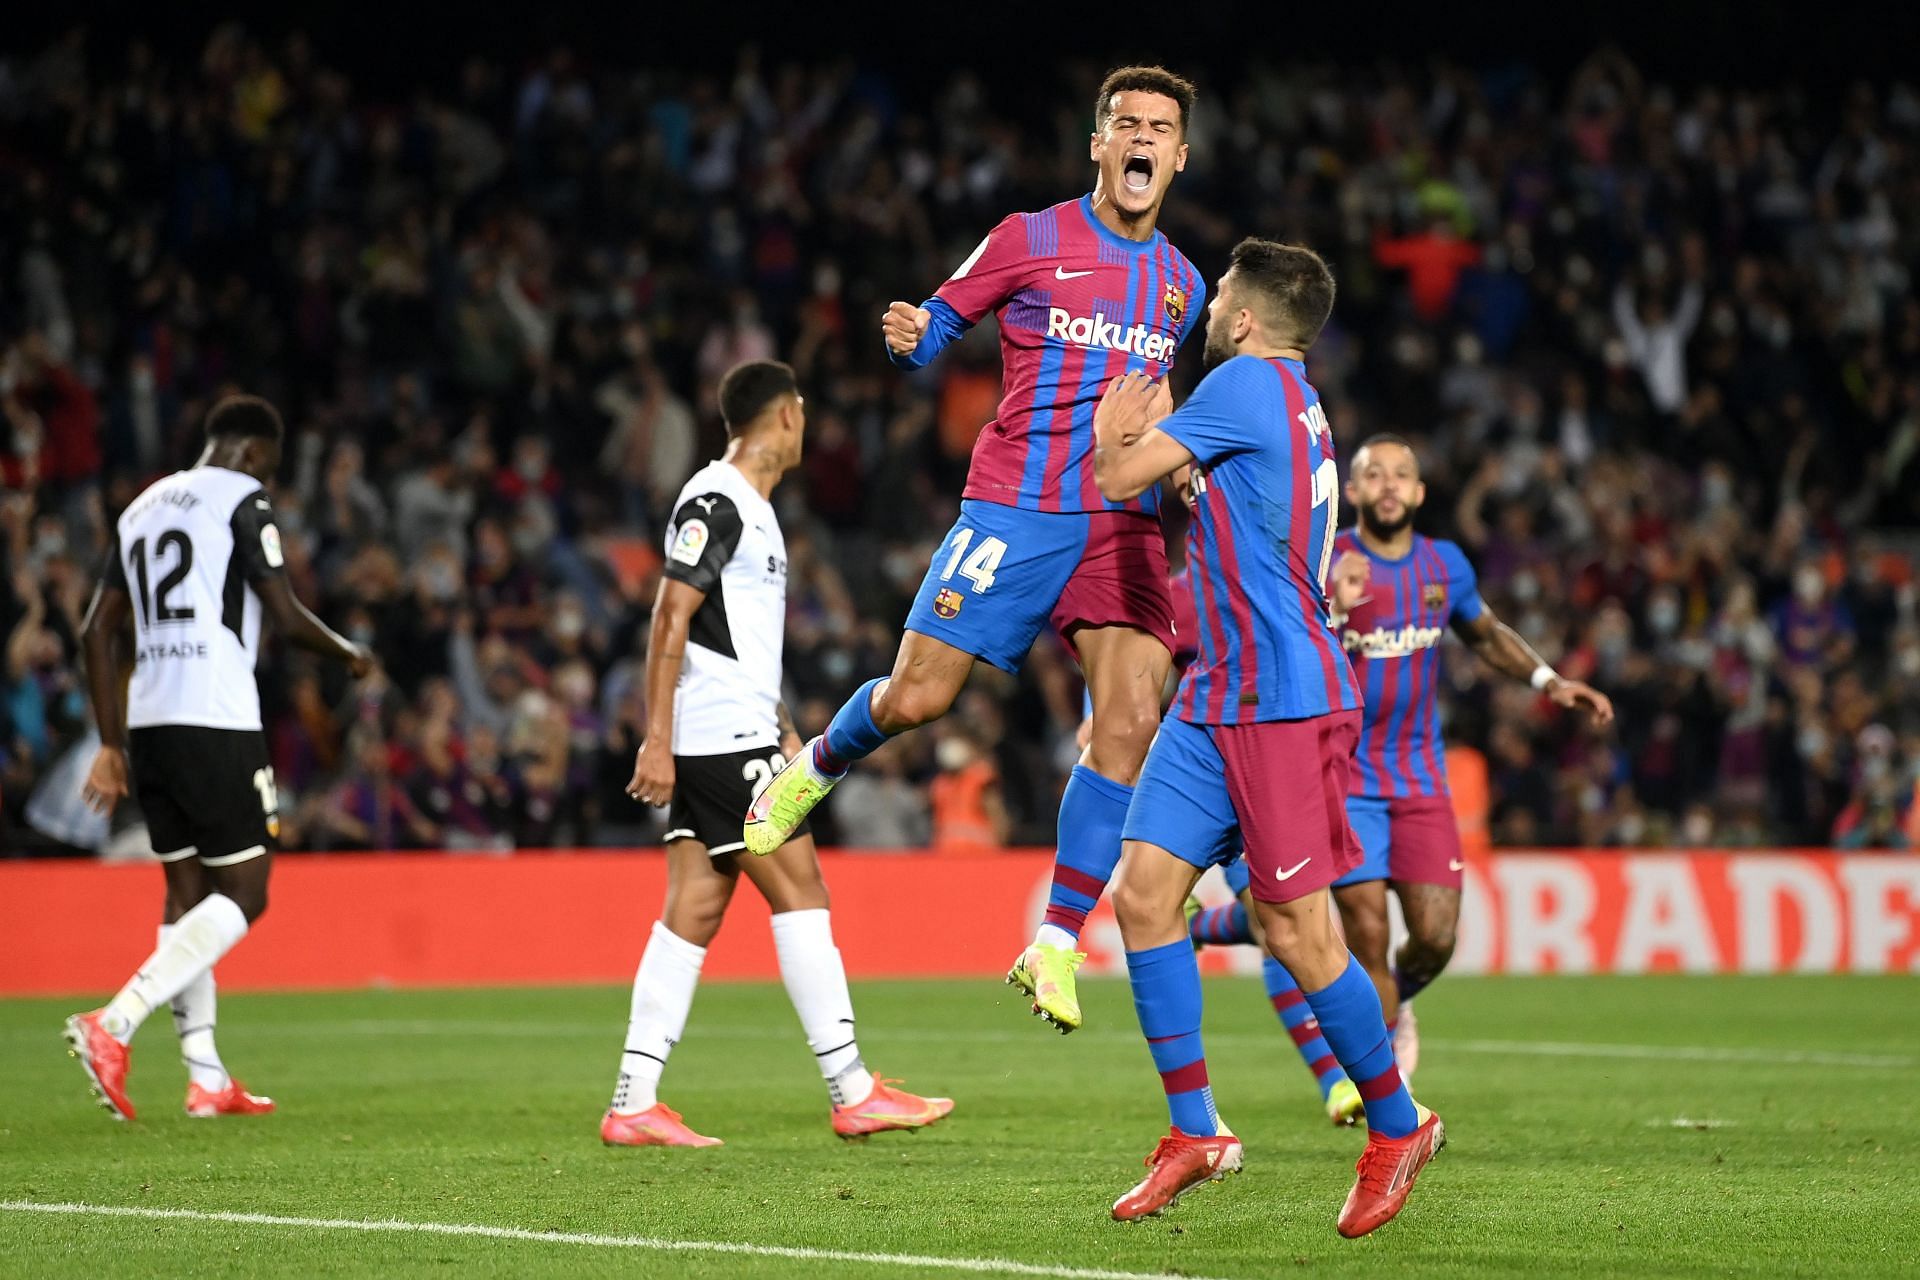 Barcelona secured a 3-1 La Liga victory over Valencia over the weekend